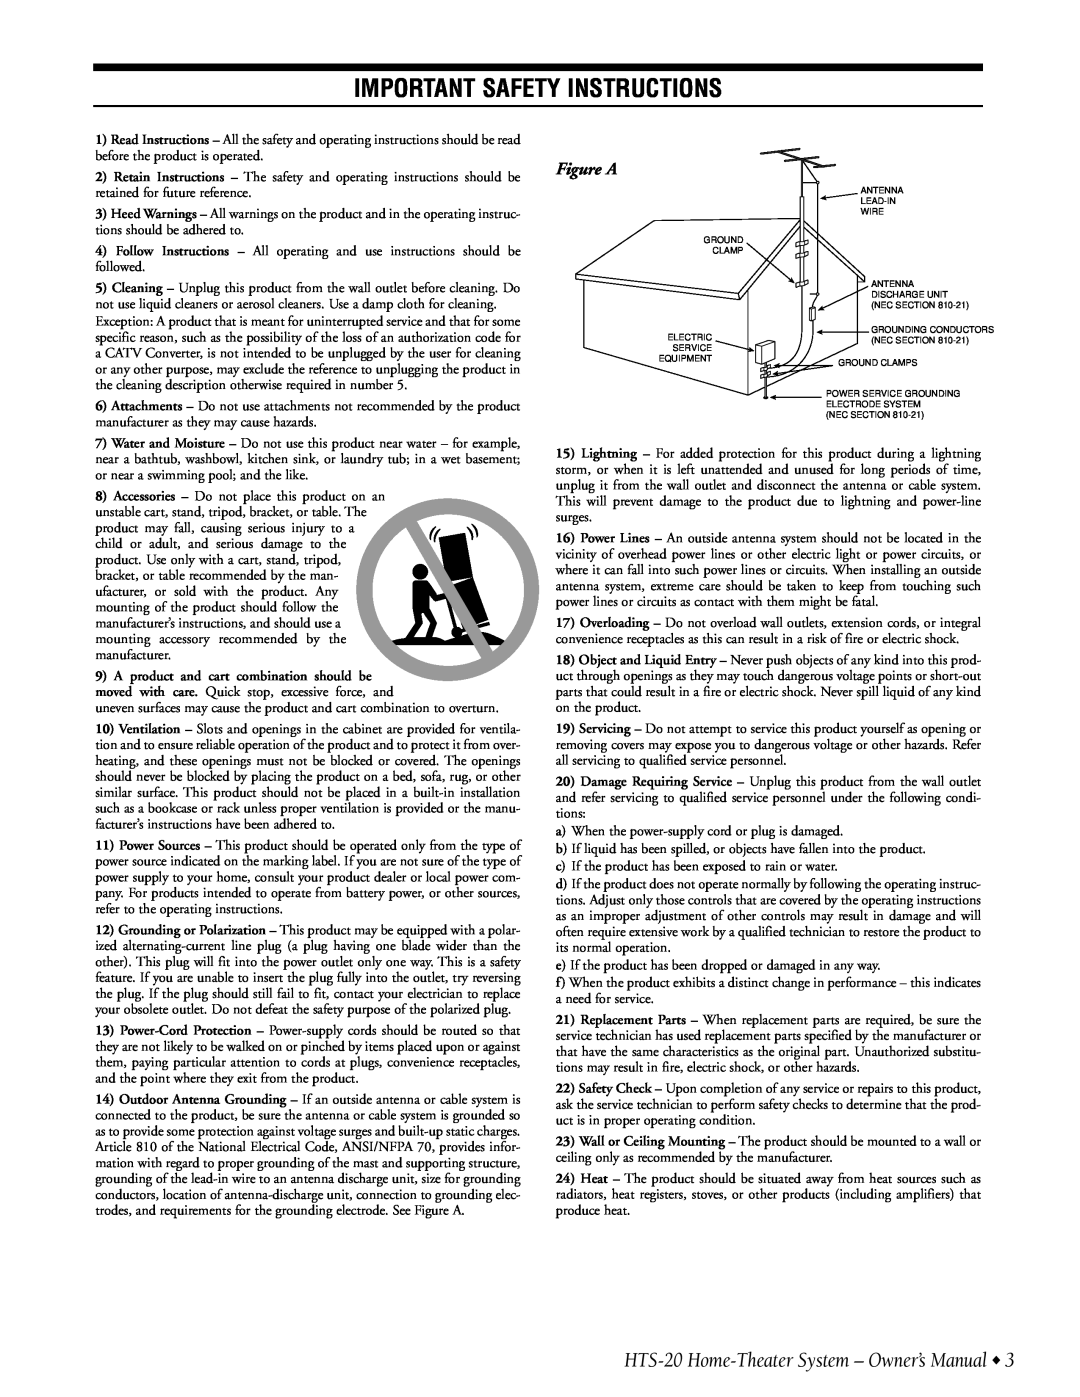 Infinity HTS-20 owner manual Important Safety Instructions, Figure A 